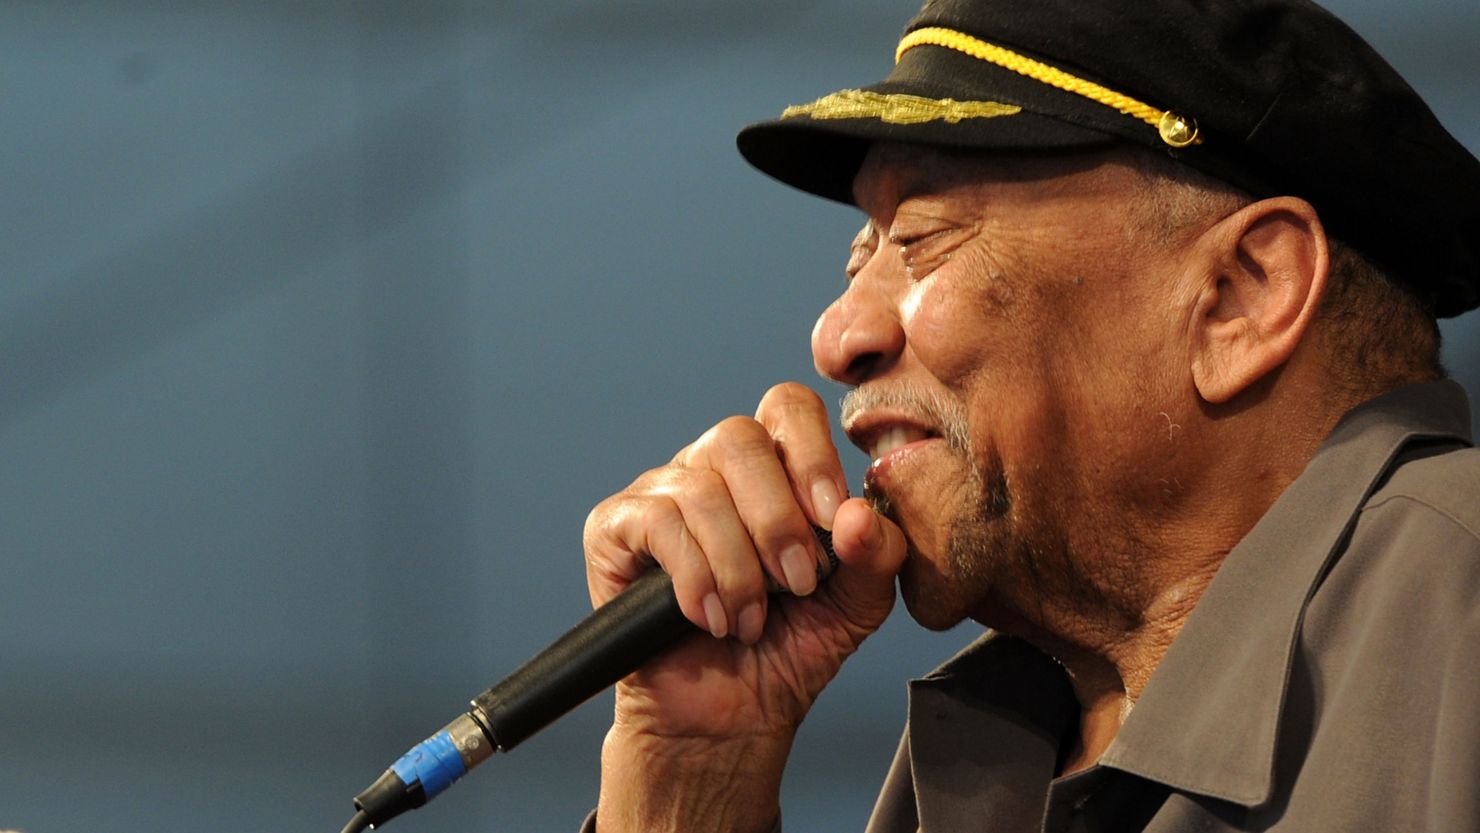 Bobby "Blue" Bland performs during the New Orleans Jazz & Heritage Festival in 2011.